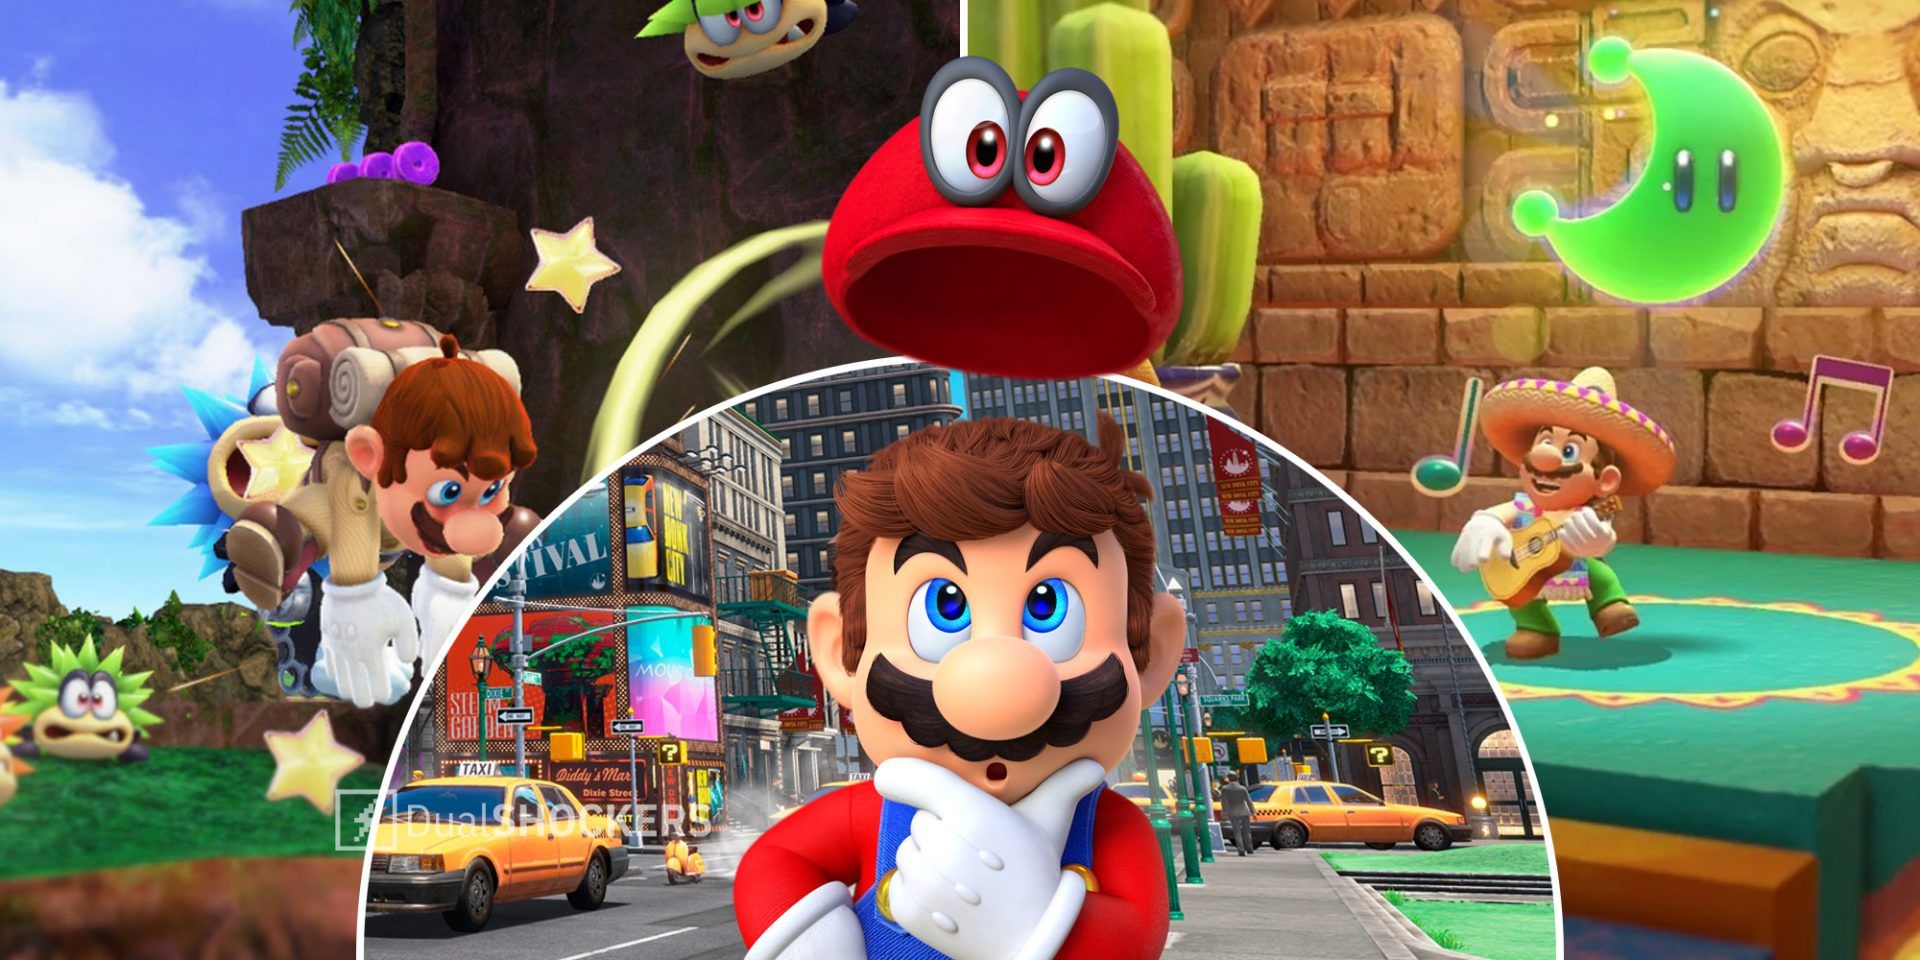 Super Mario Odyssey Mario in Cascade Kingdom on left, Mario in New Donk City in middle, Mario in Sand Kingdom on right